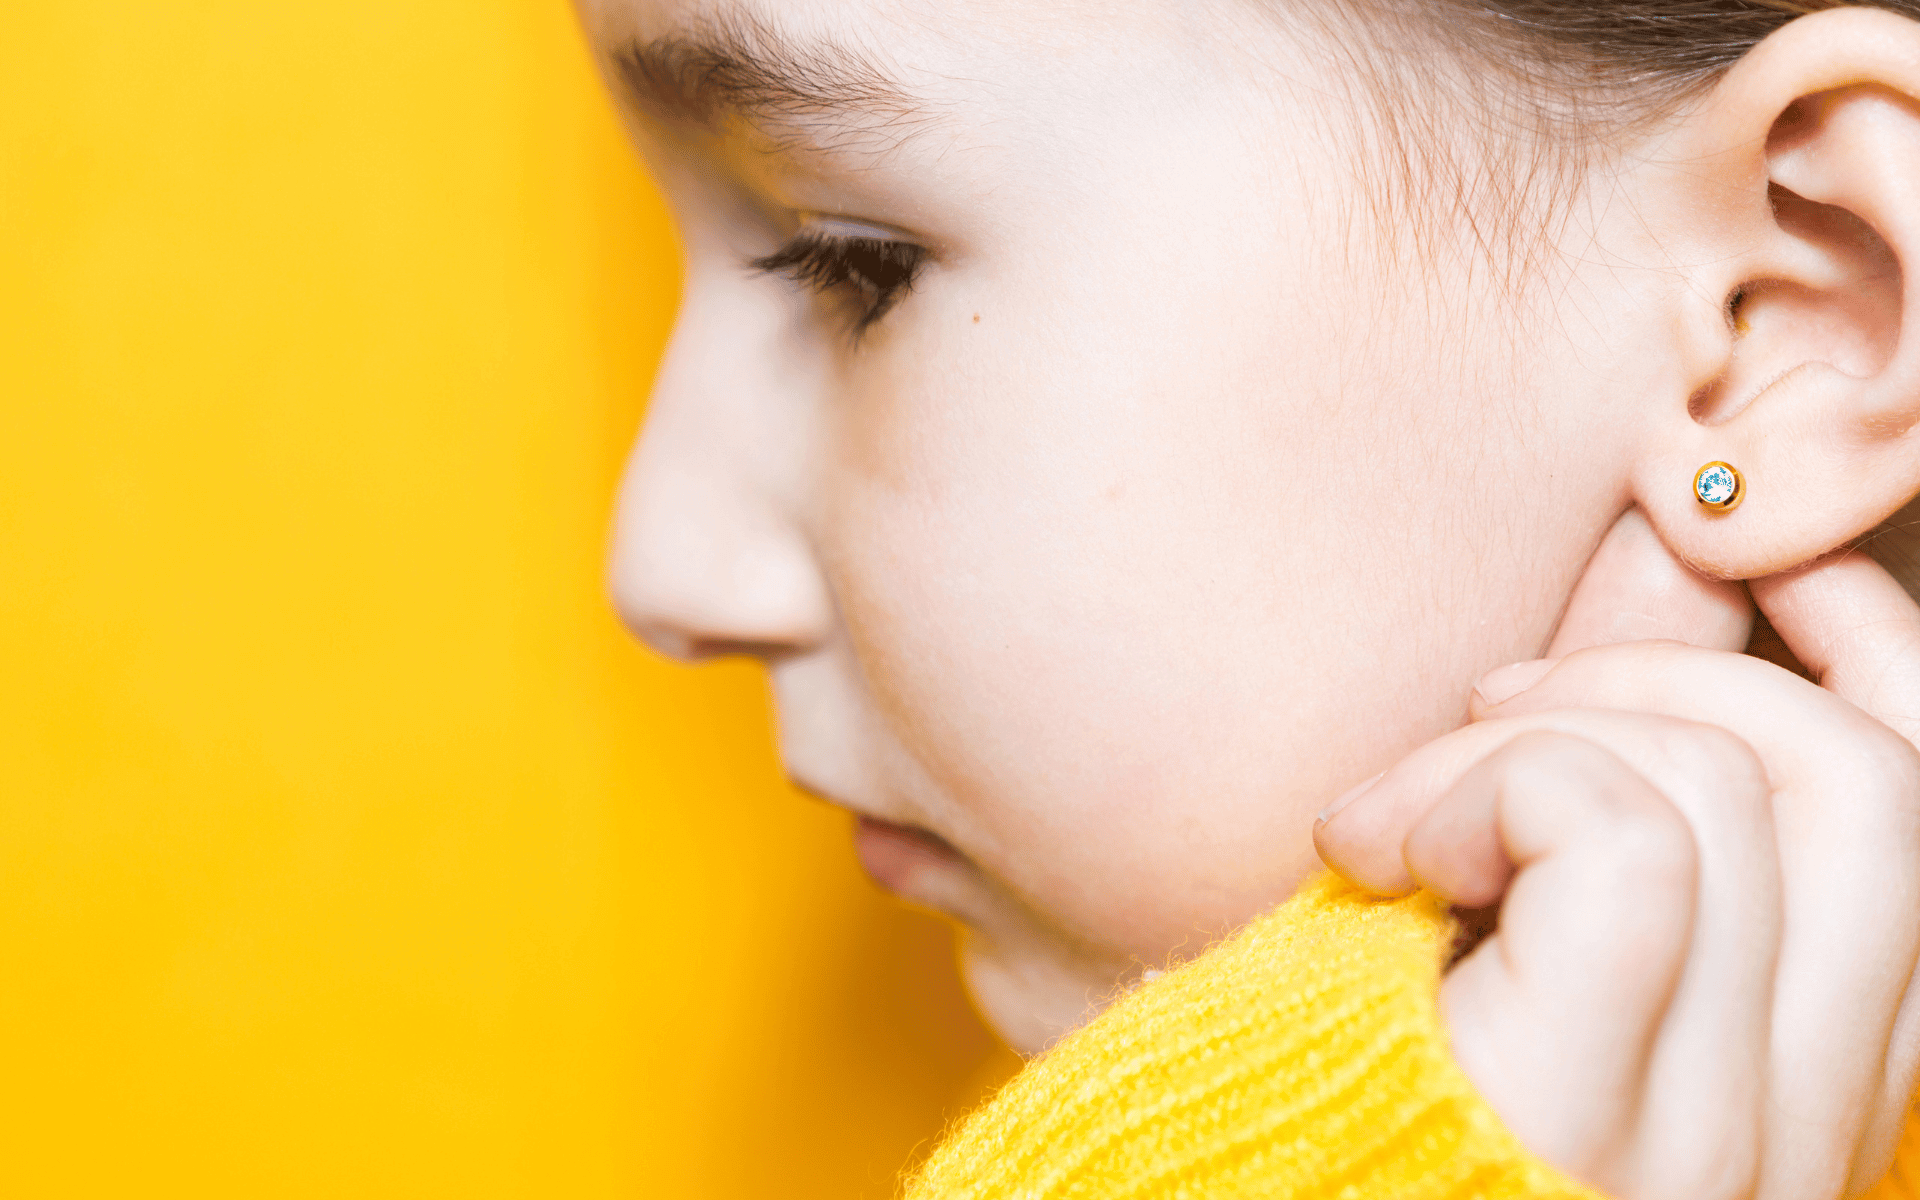 Safe and Stylish Earrings for Kids